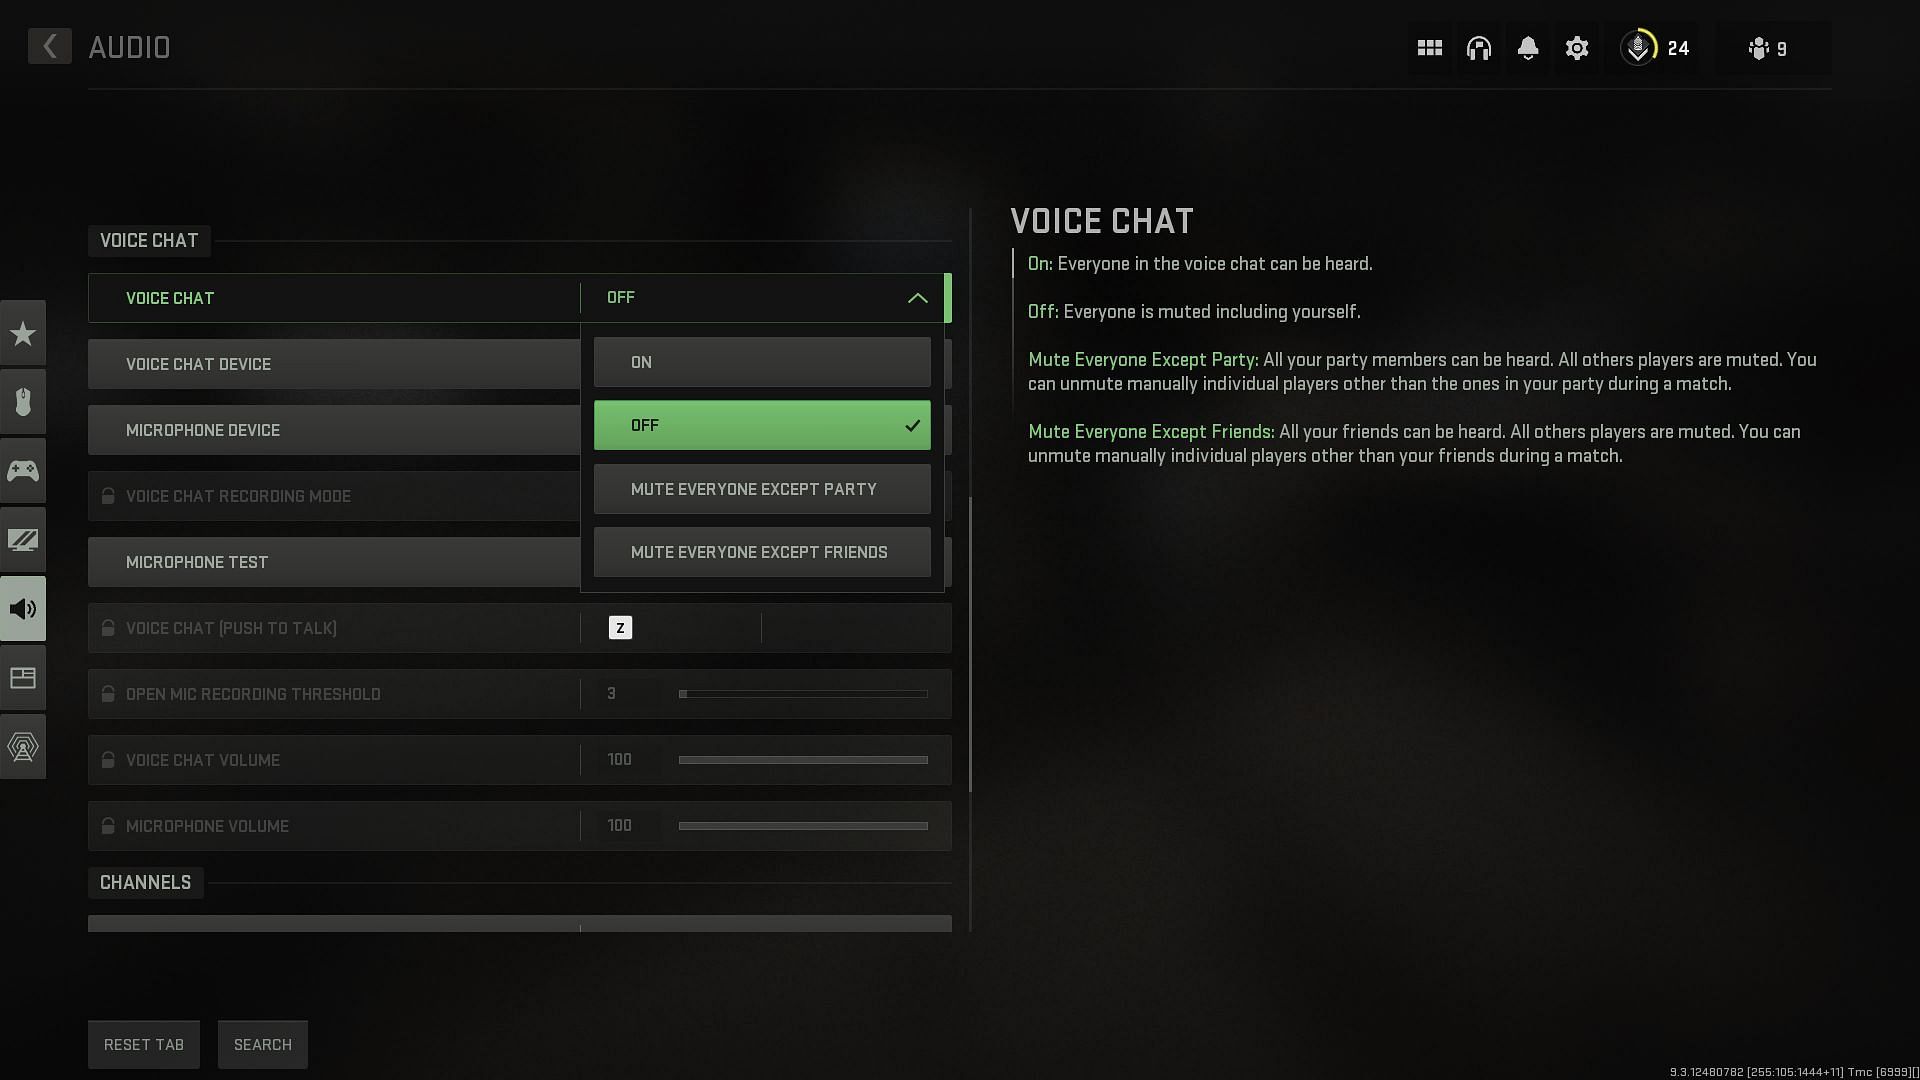 How To Game Chat, Voice Chat & Message Friends On Roblox For PS4 / PS5 